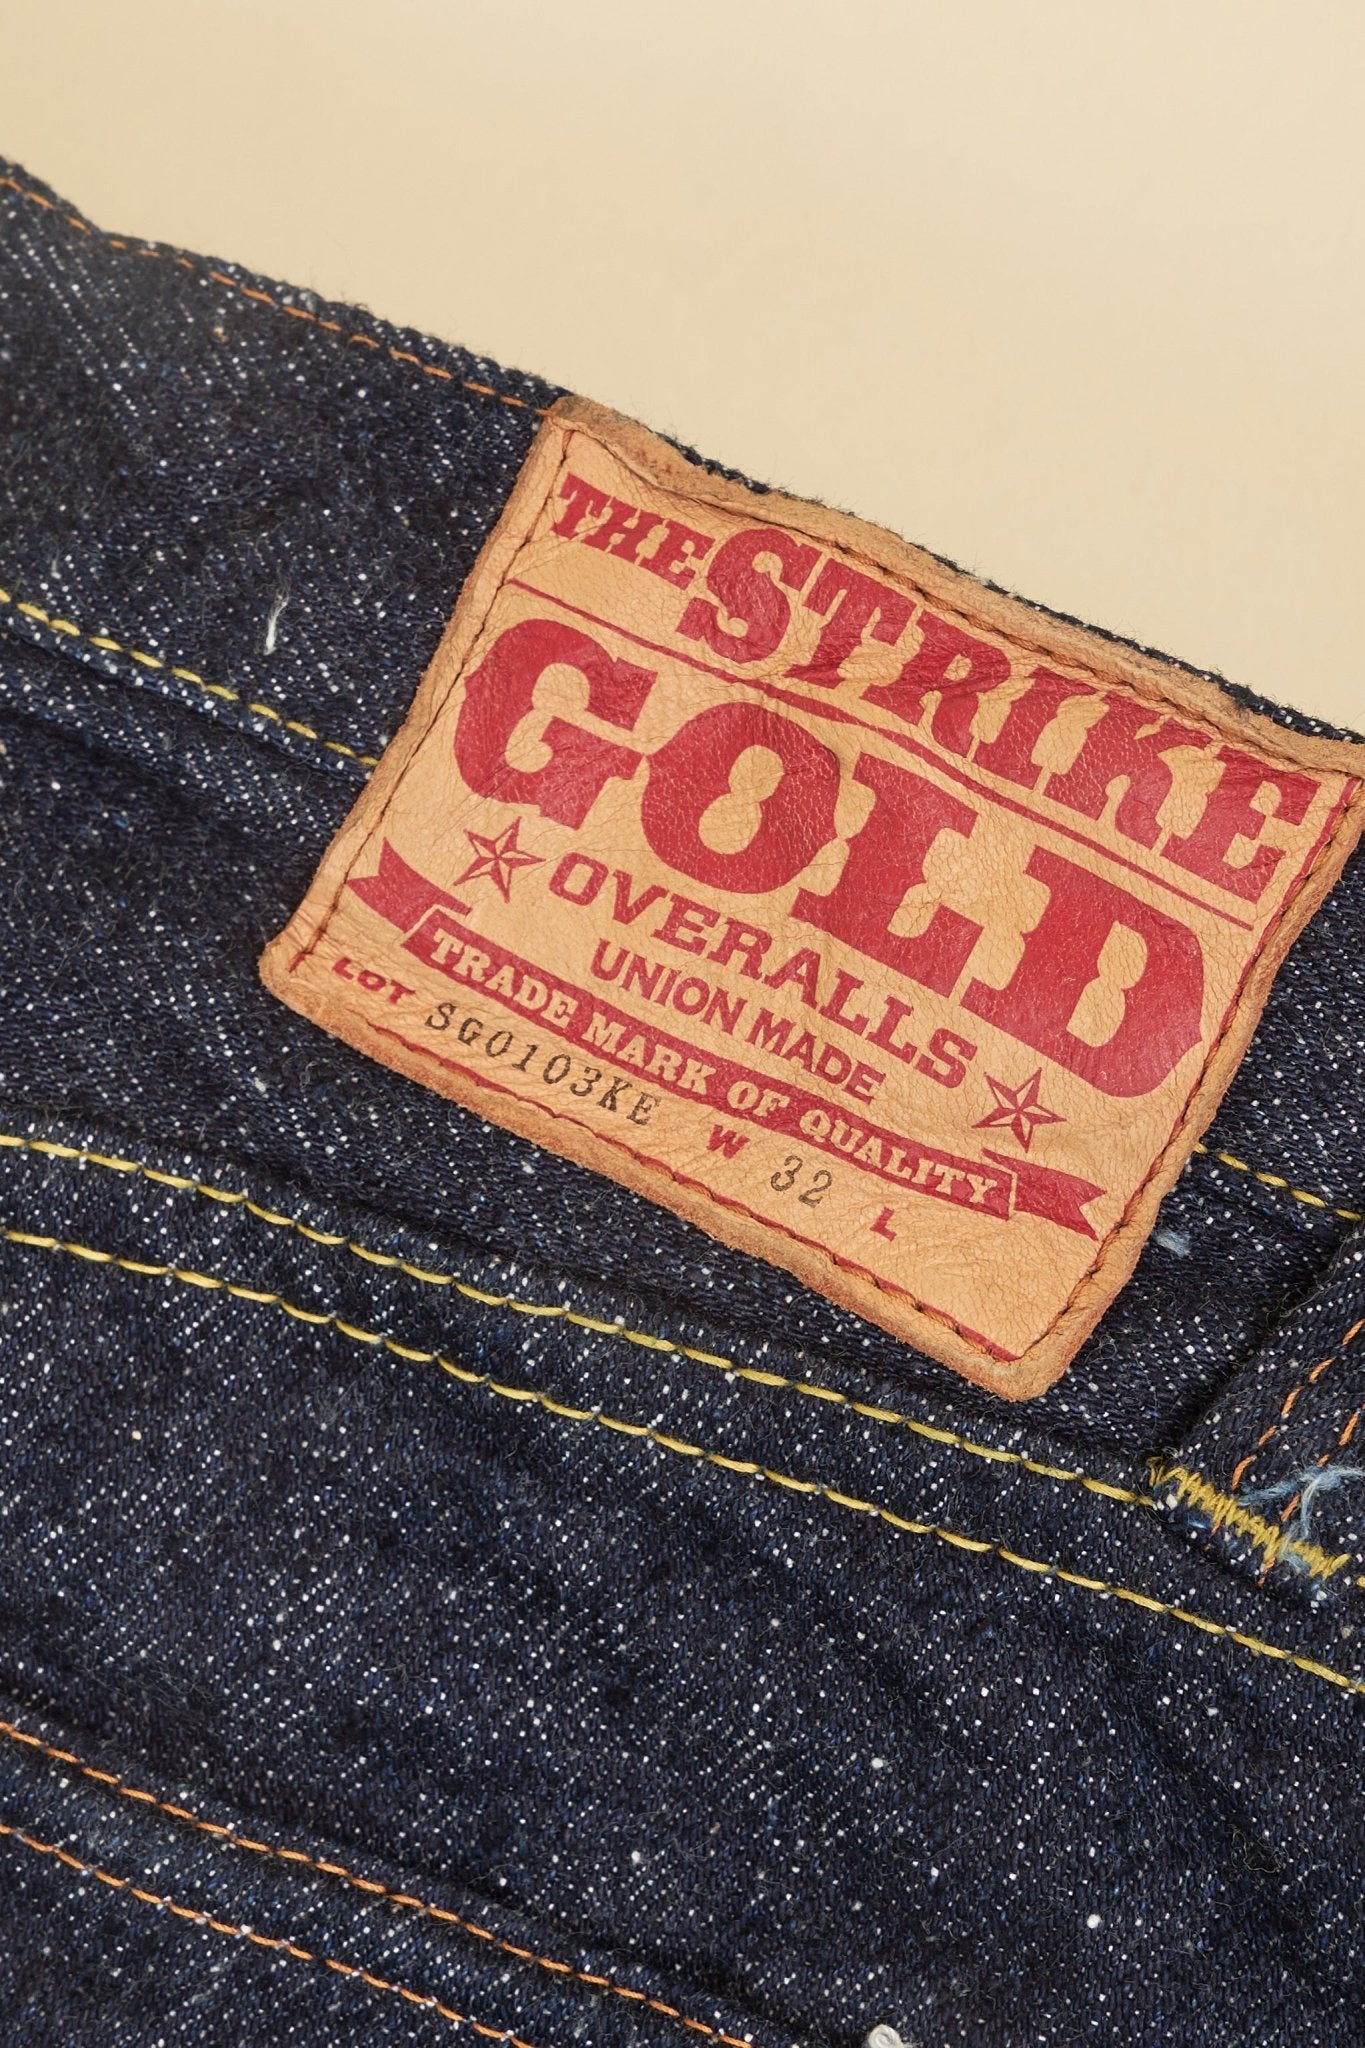 The Strike Gold "Keep Earth" Organic / Recycled Cotton Straight Selvedge Jeans -The Strike Gold - URAHARA